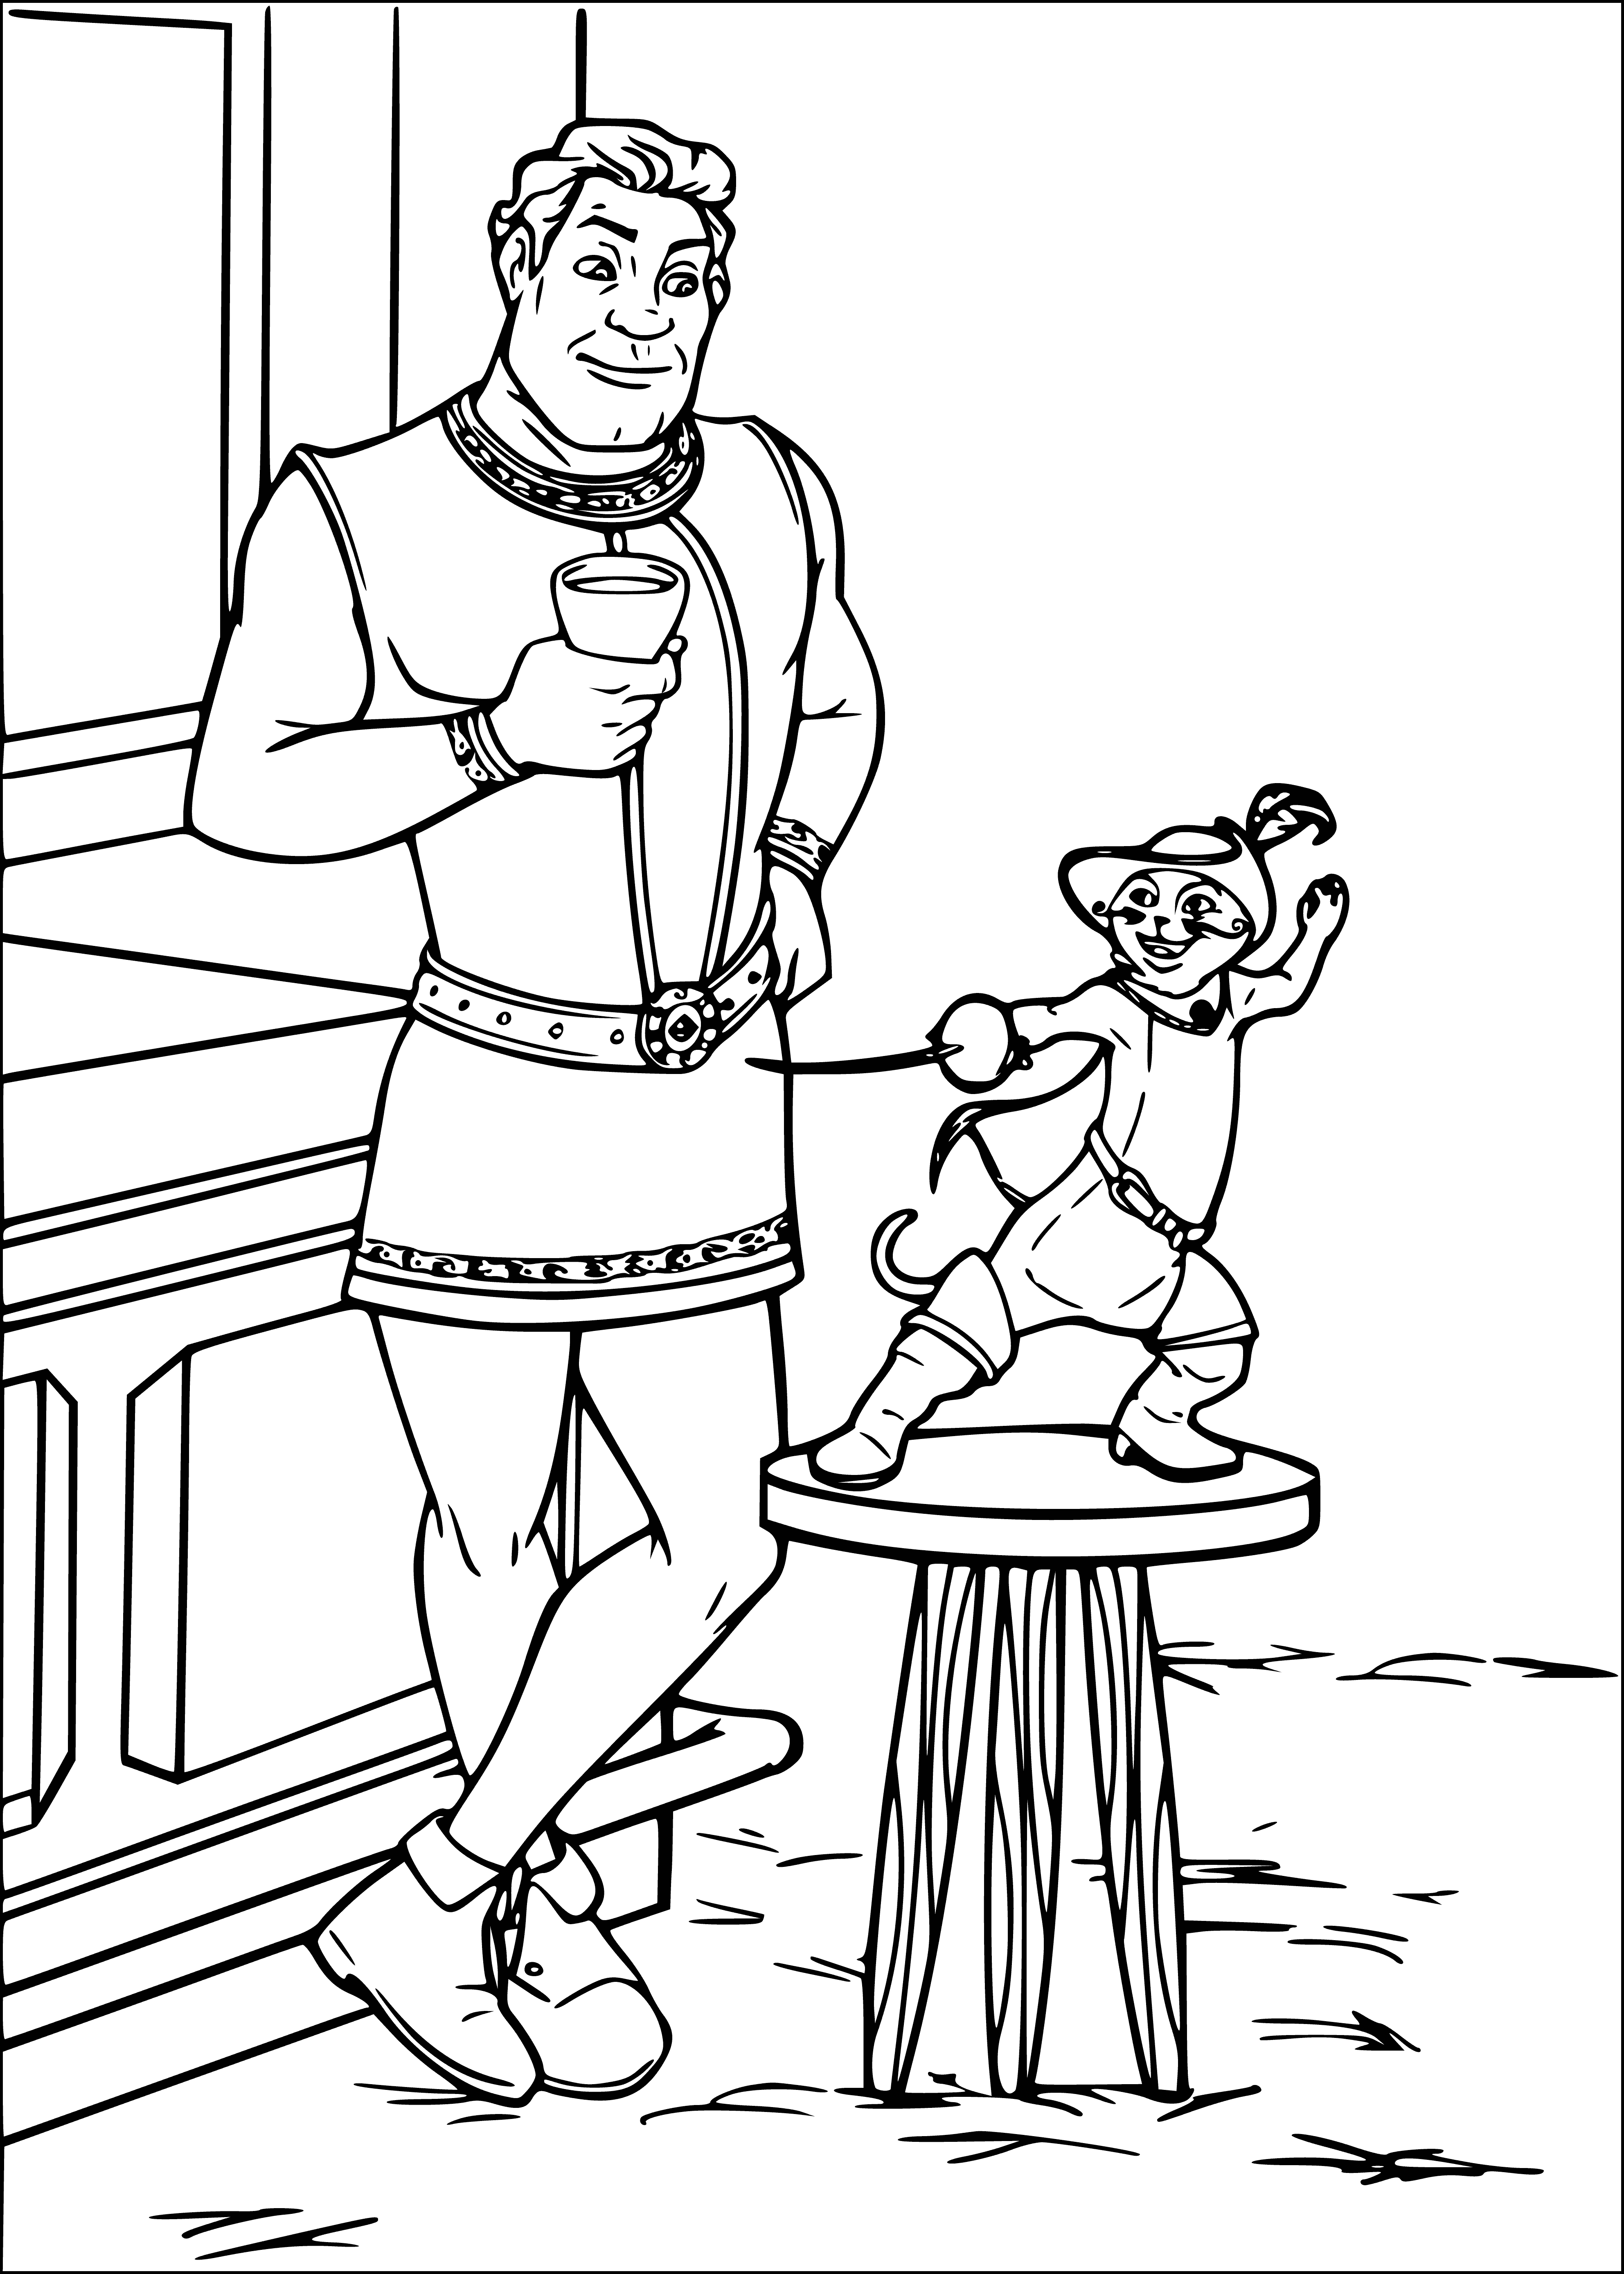 coloring page: Big green ogre Shrek and small orange cat looking at something off camera; Shrek content, cat scared.